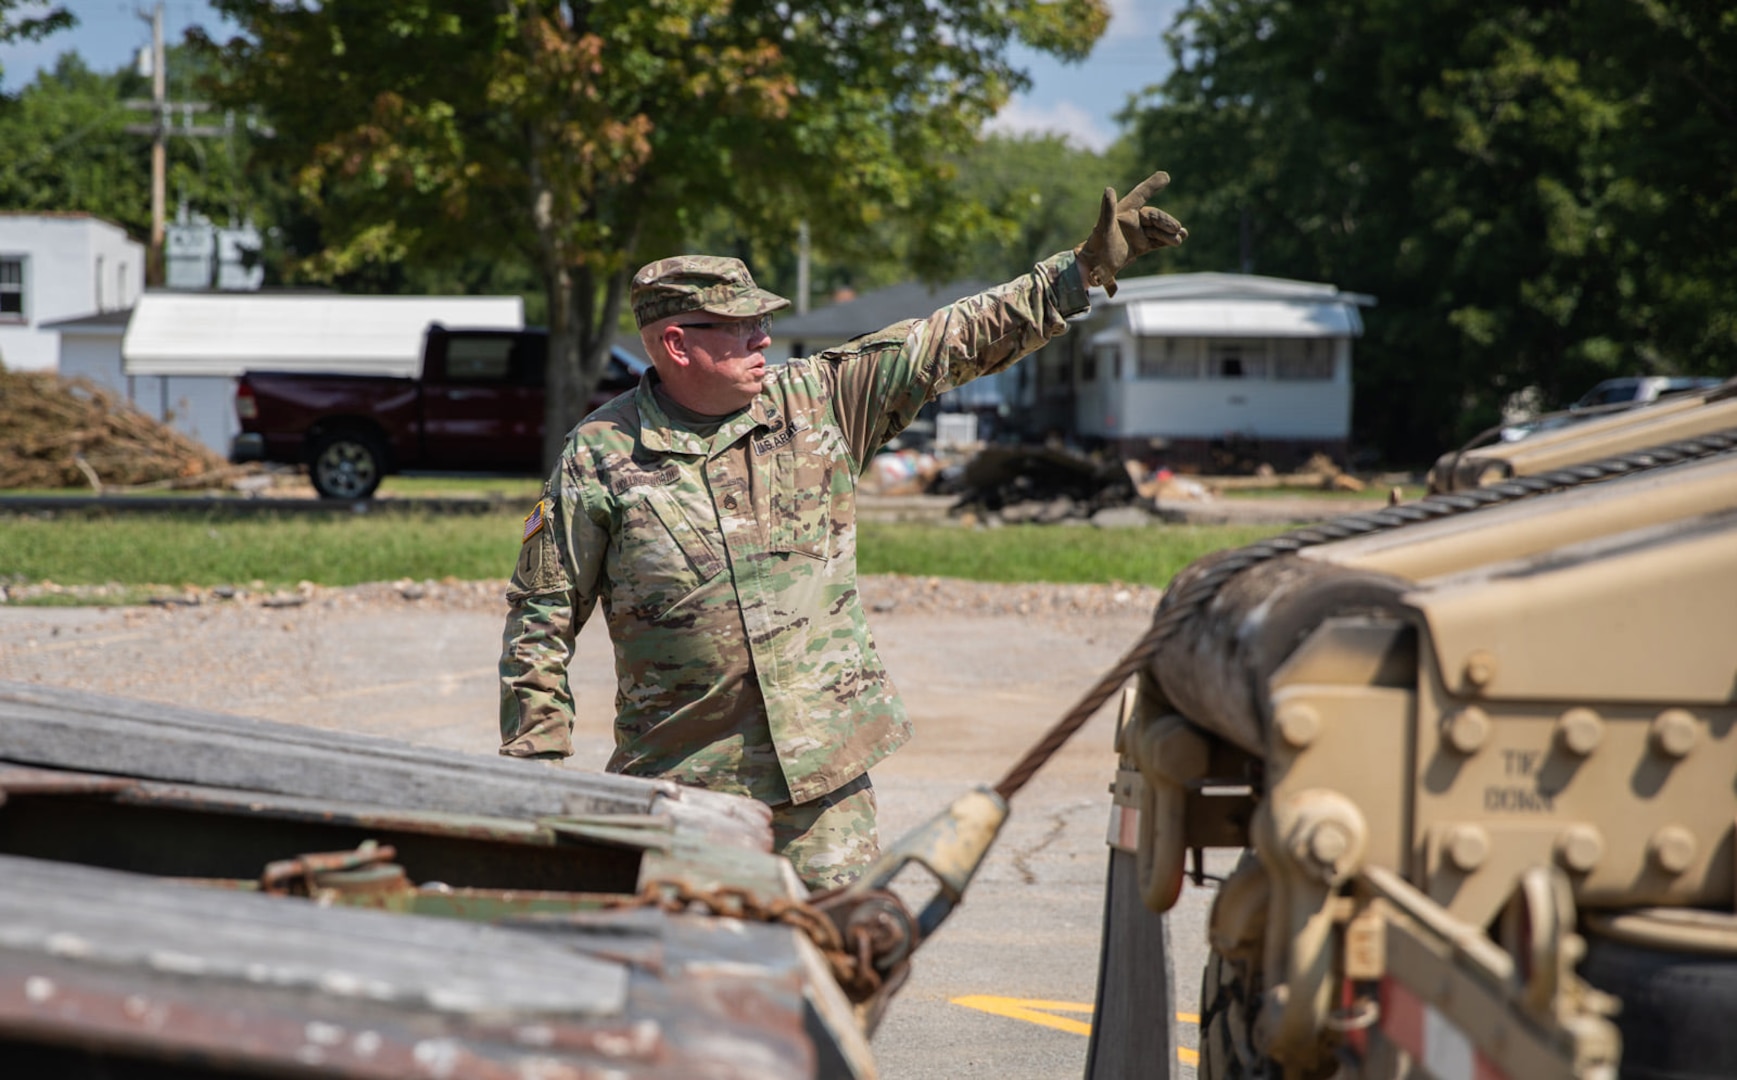 Dozens of Tennessee National Guard Soldiers and Airmen are assisting with relief efforts in Humphreys County after severe flooding in the area. Guard members are helping with debris cleanup, security, traffic control and distribution of supplies.